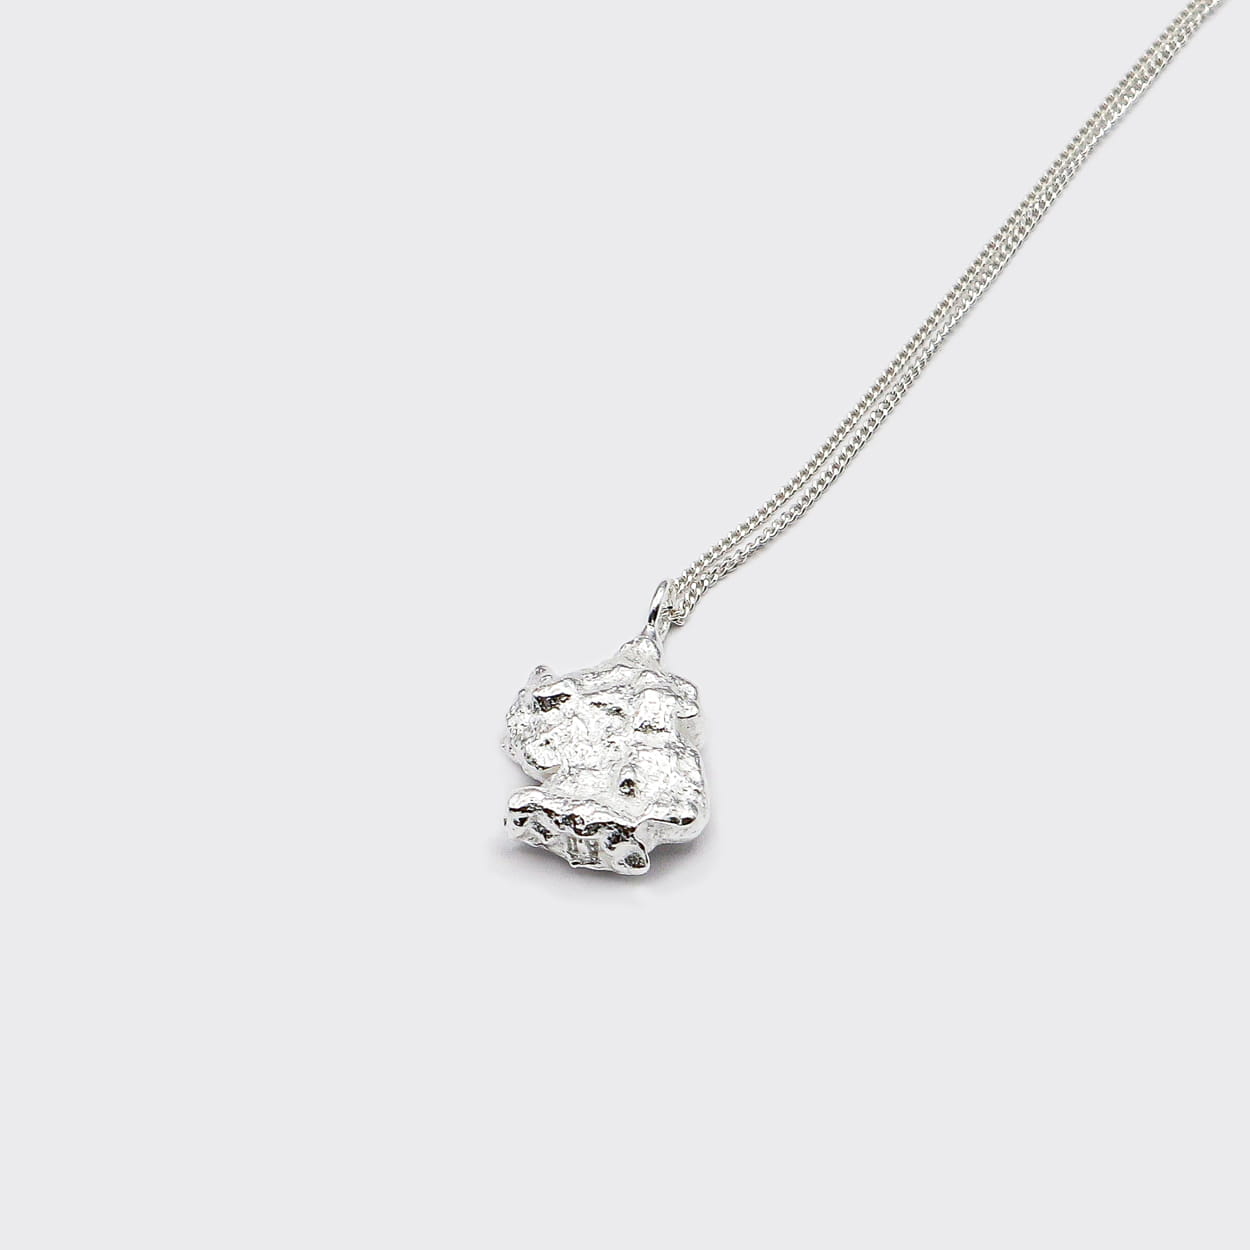 Atelier Domingo's Brooklyn necklace recalls a gold nugget. The pendant is made of a high-quality 925 Sterling silver plating (10 microns). The cuban chain is made of solid 925 sterling silver. This necklace is unisex, made in Spain for both men and women.